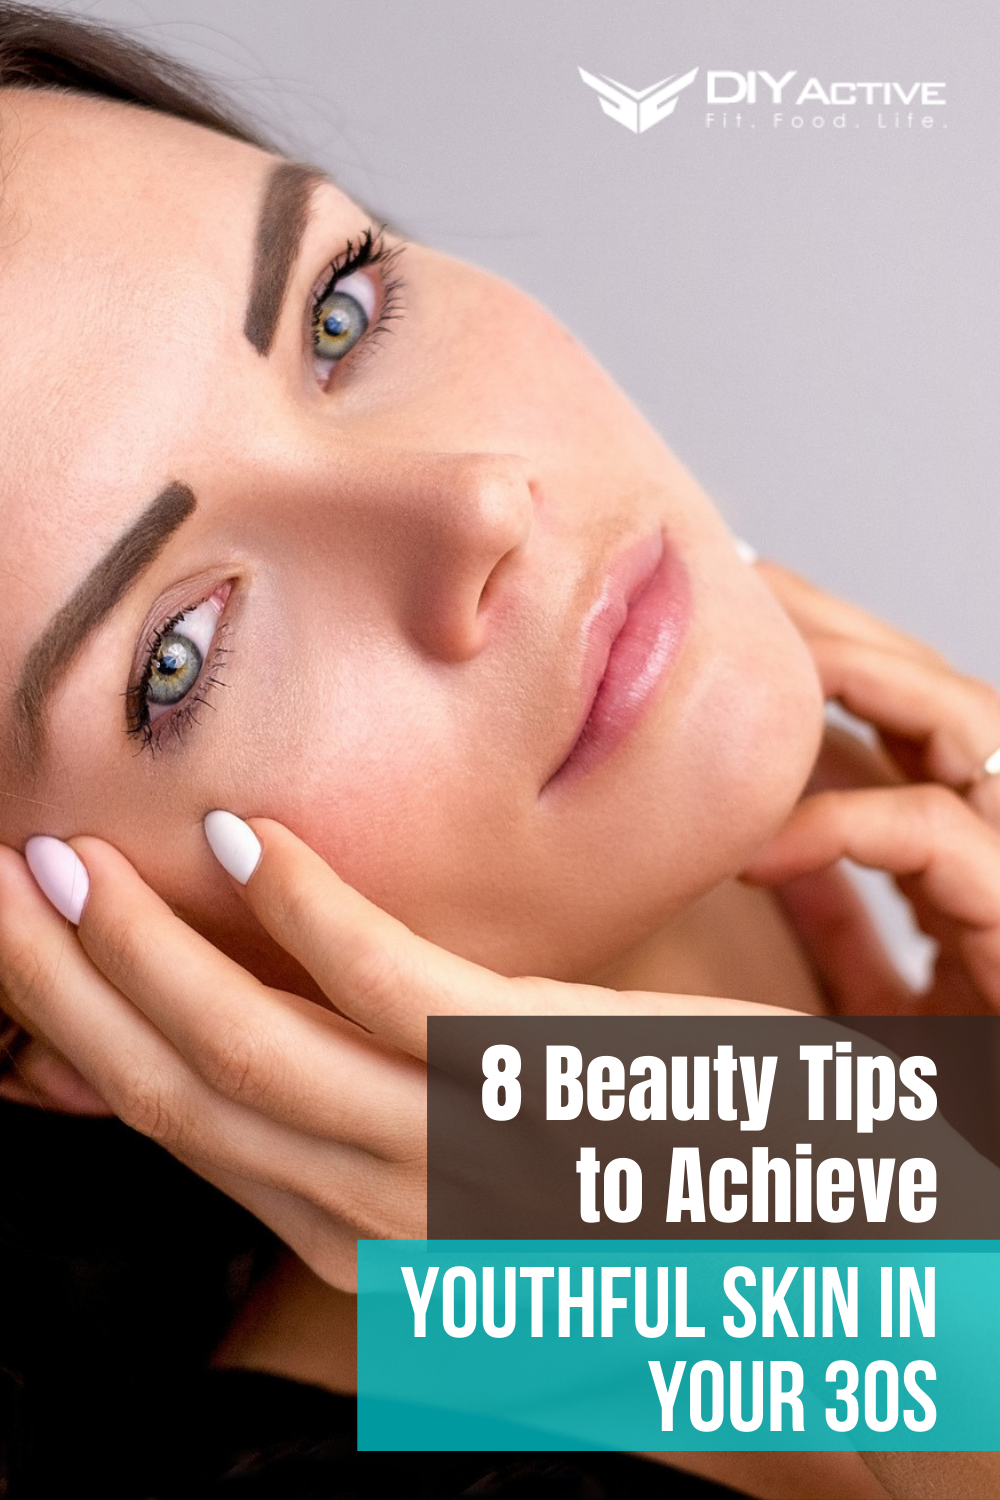 8 Beauty Tips to Achieve Youthful Skin in Your 30s